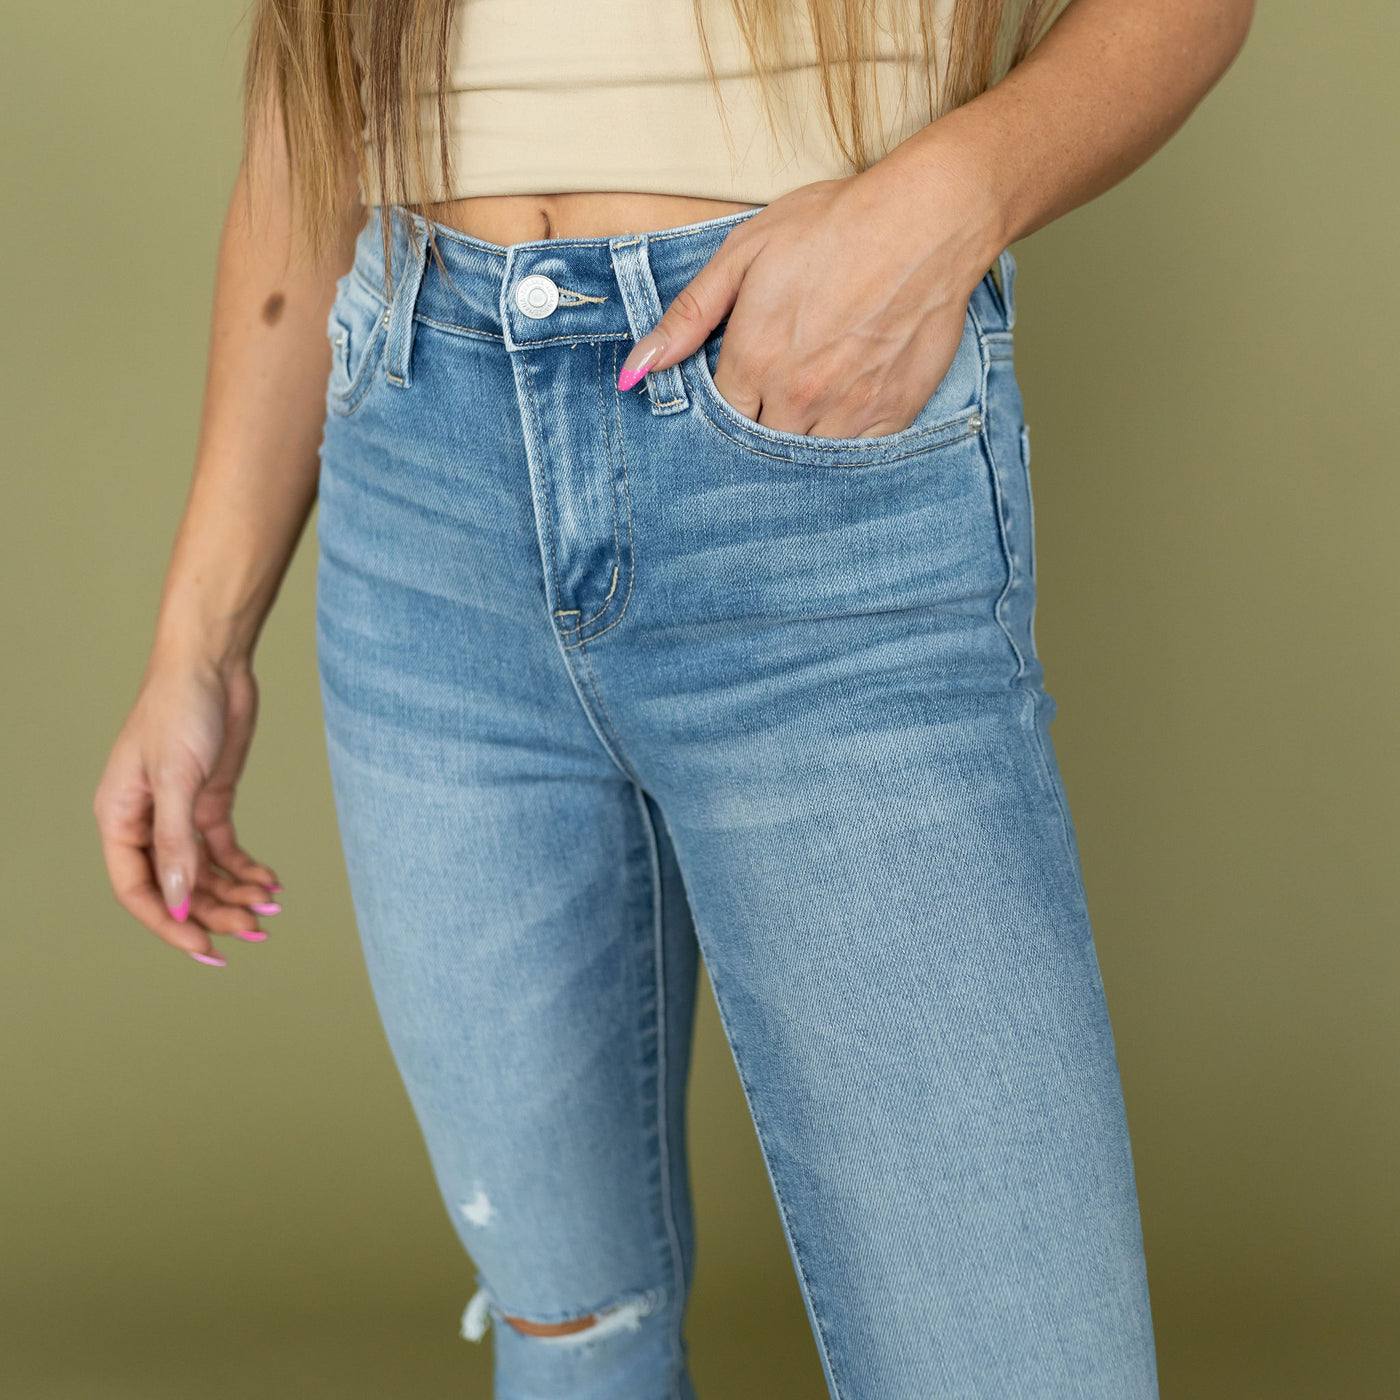 High Rise Distressed Cropped Skinny Jeans